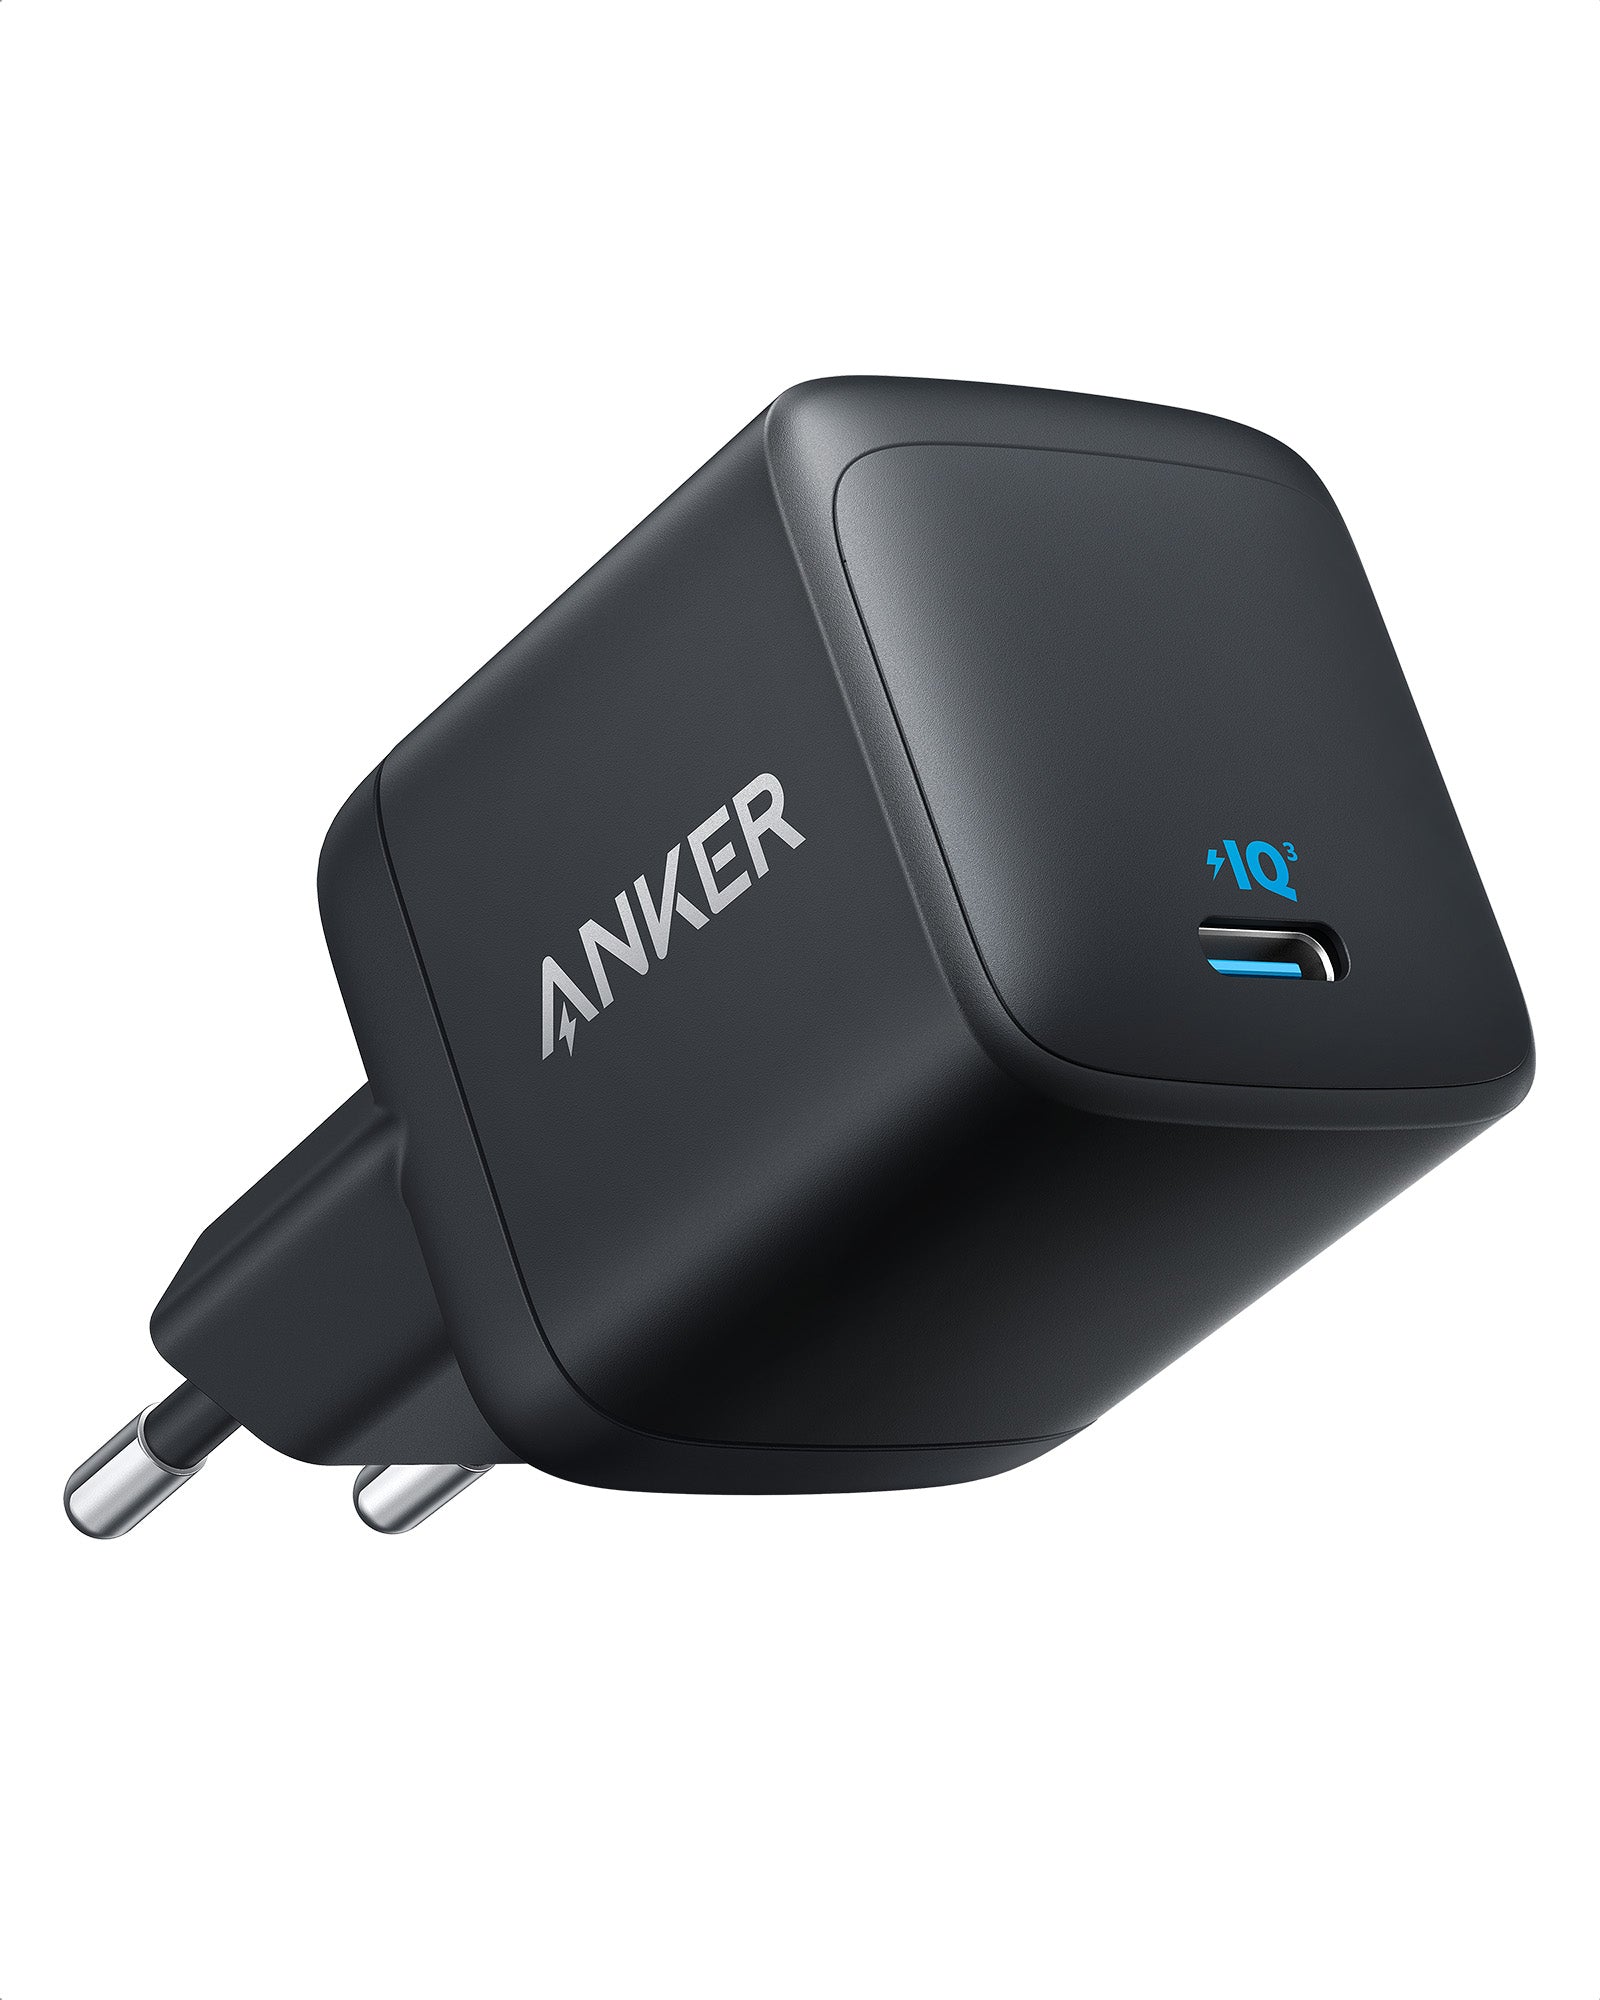 Anker Nano ll 45W' review that is compact and can be charged from